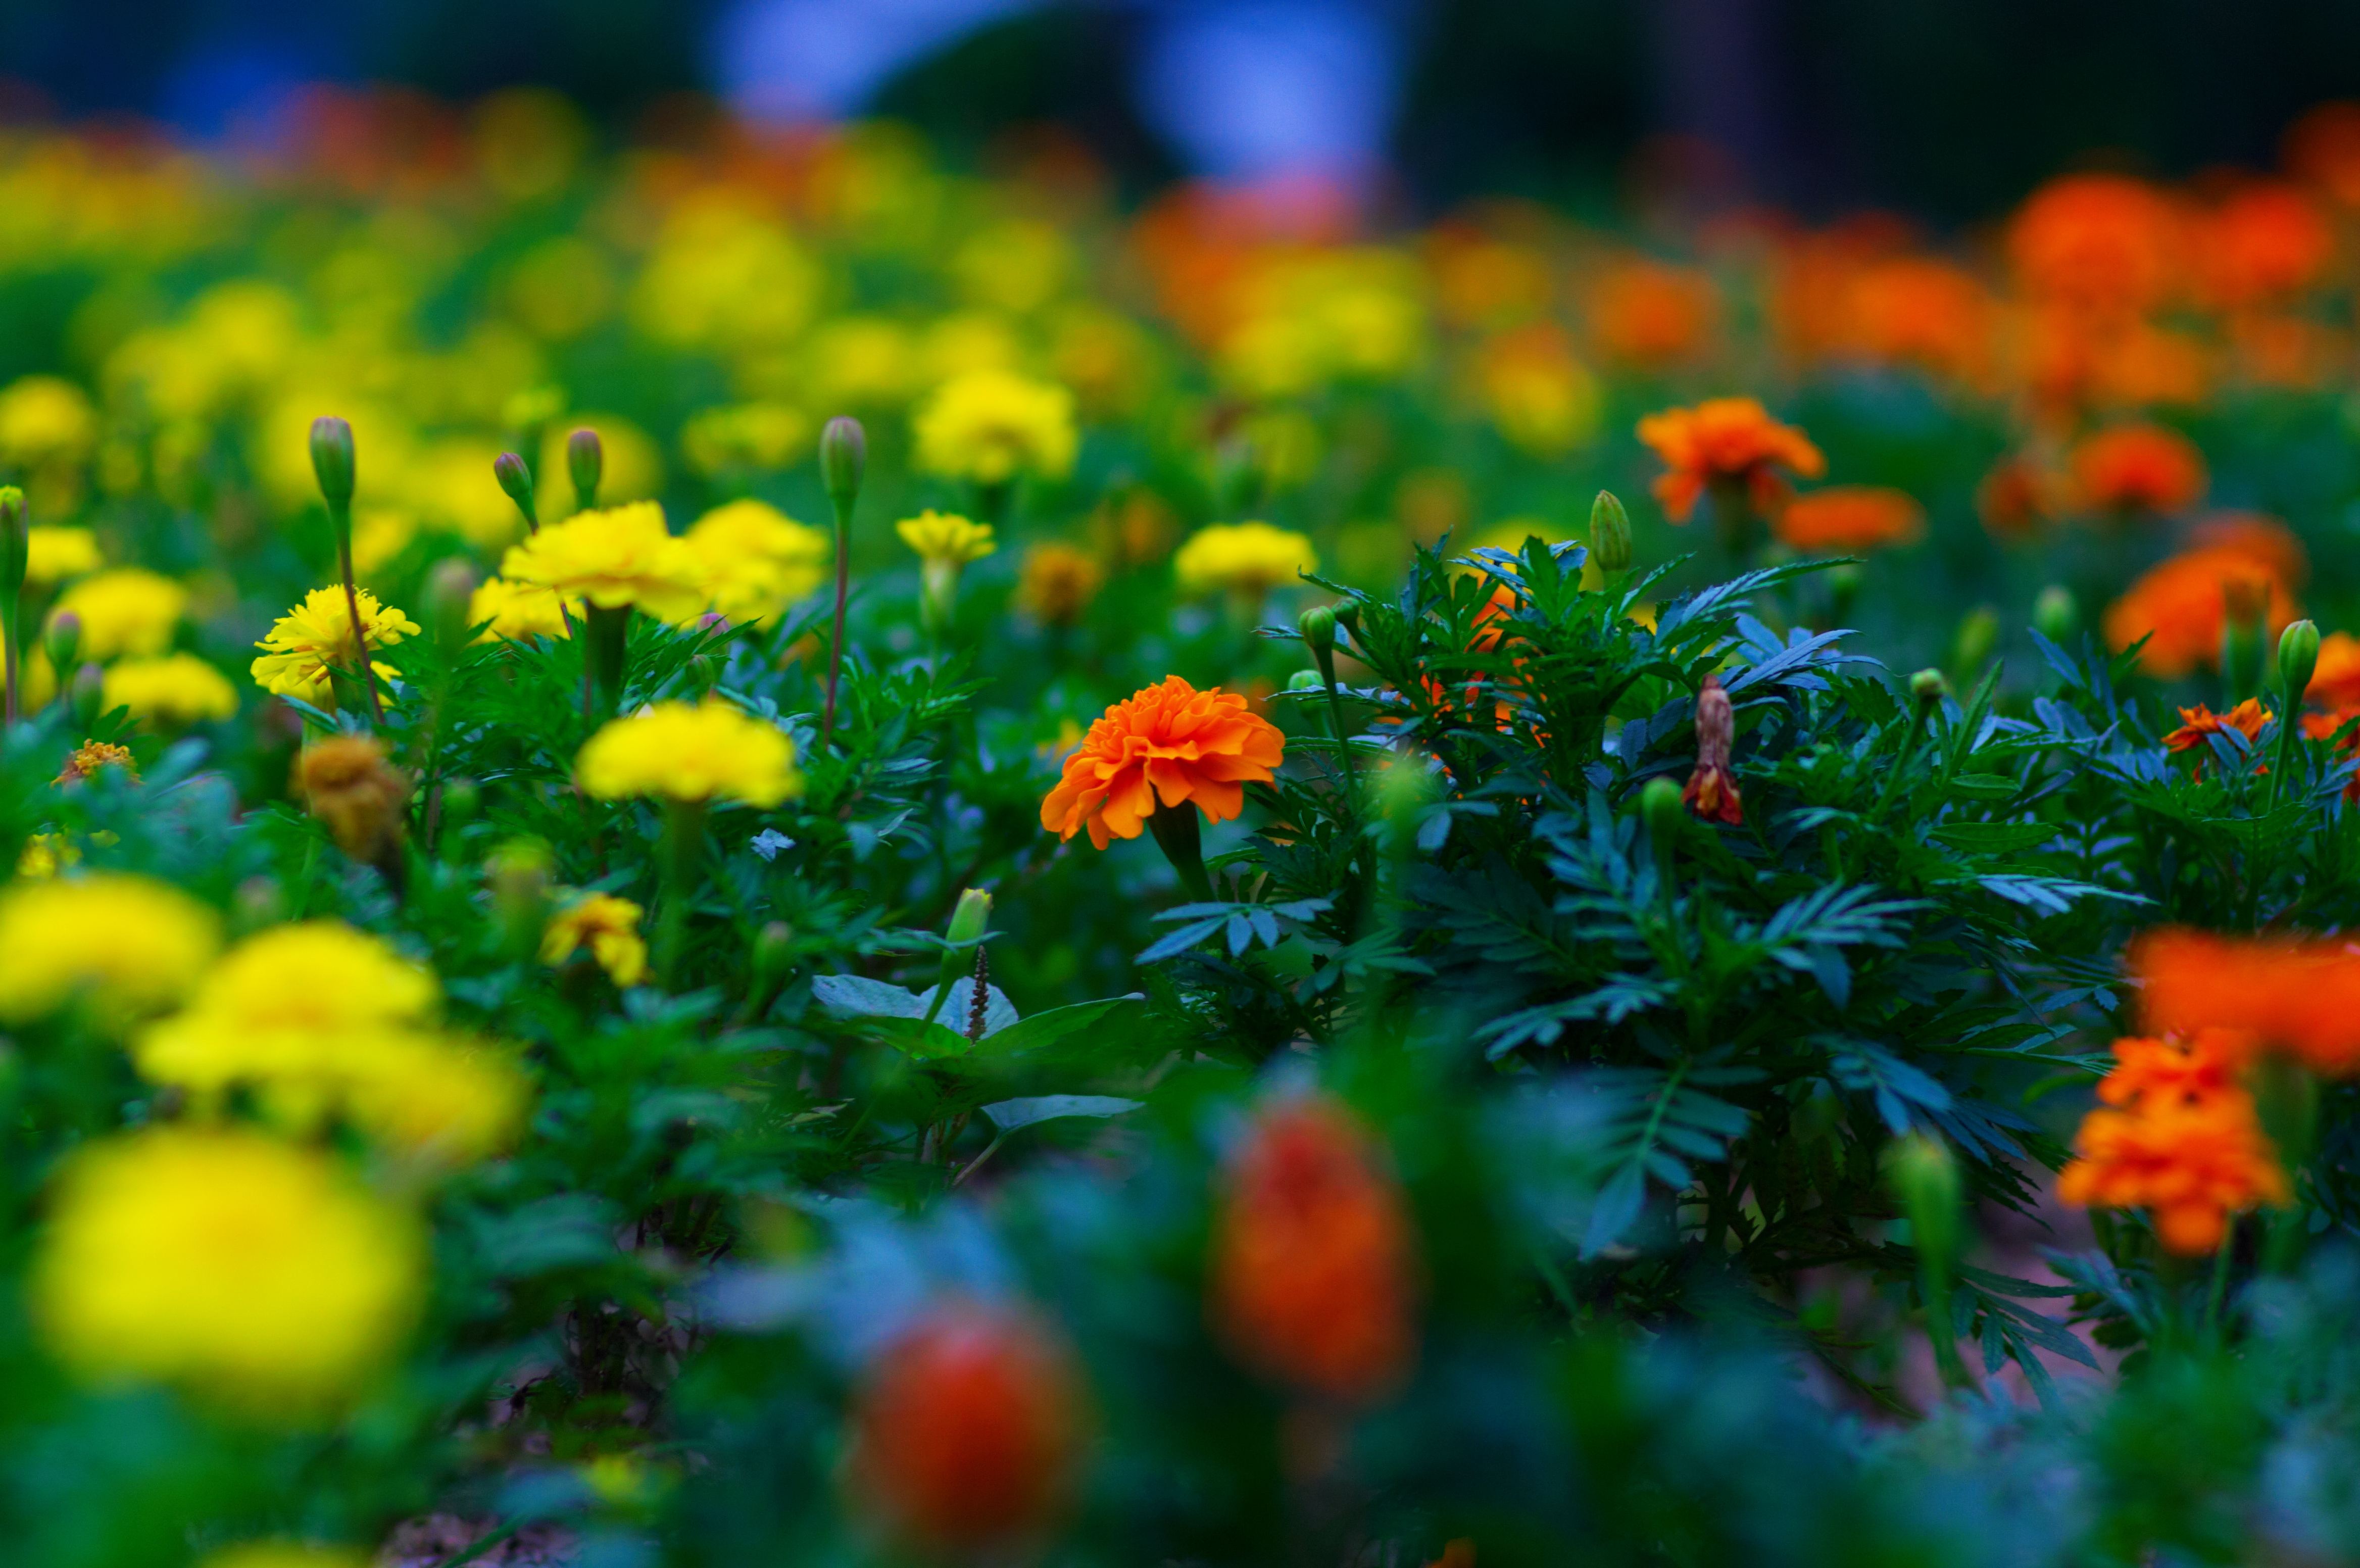 A field of colorful flowers, with a blurred background. - Nature